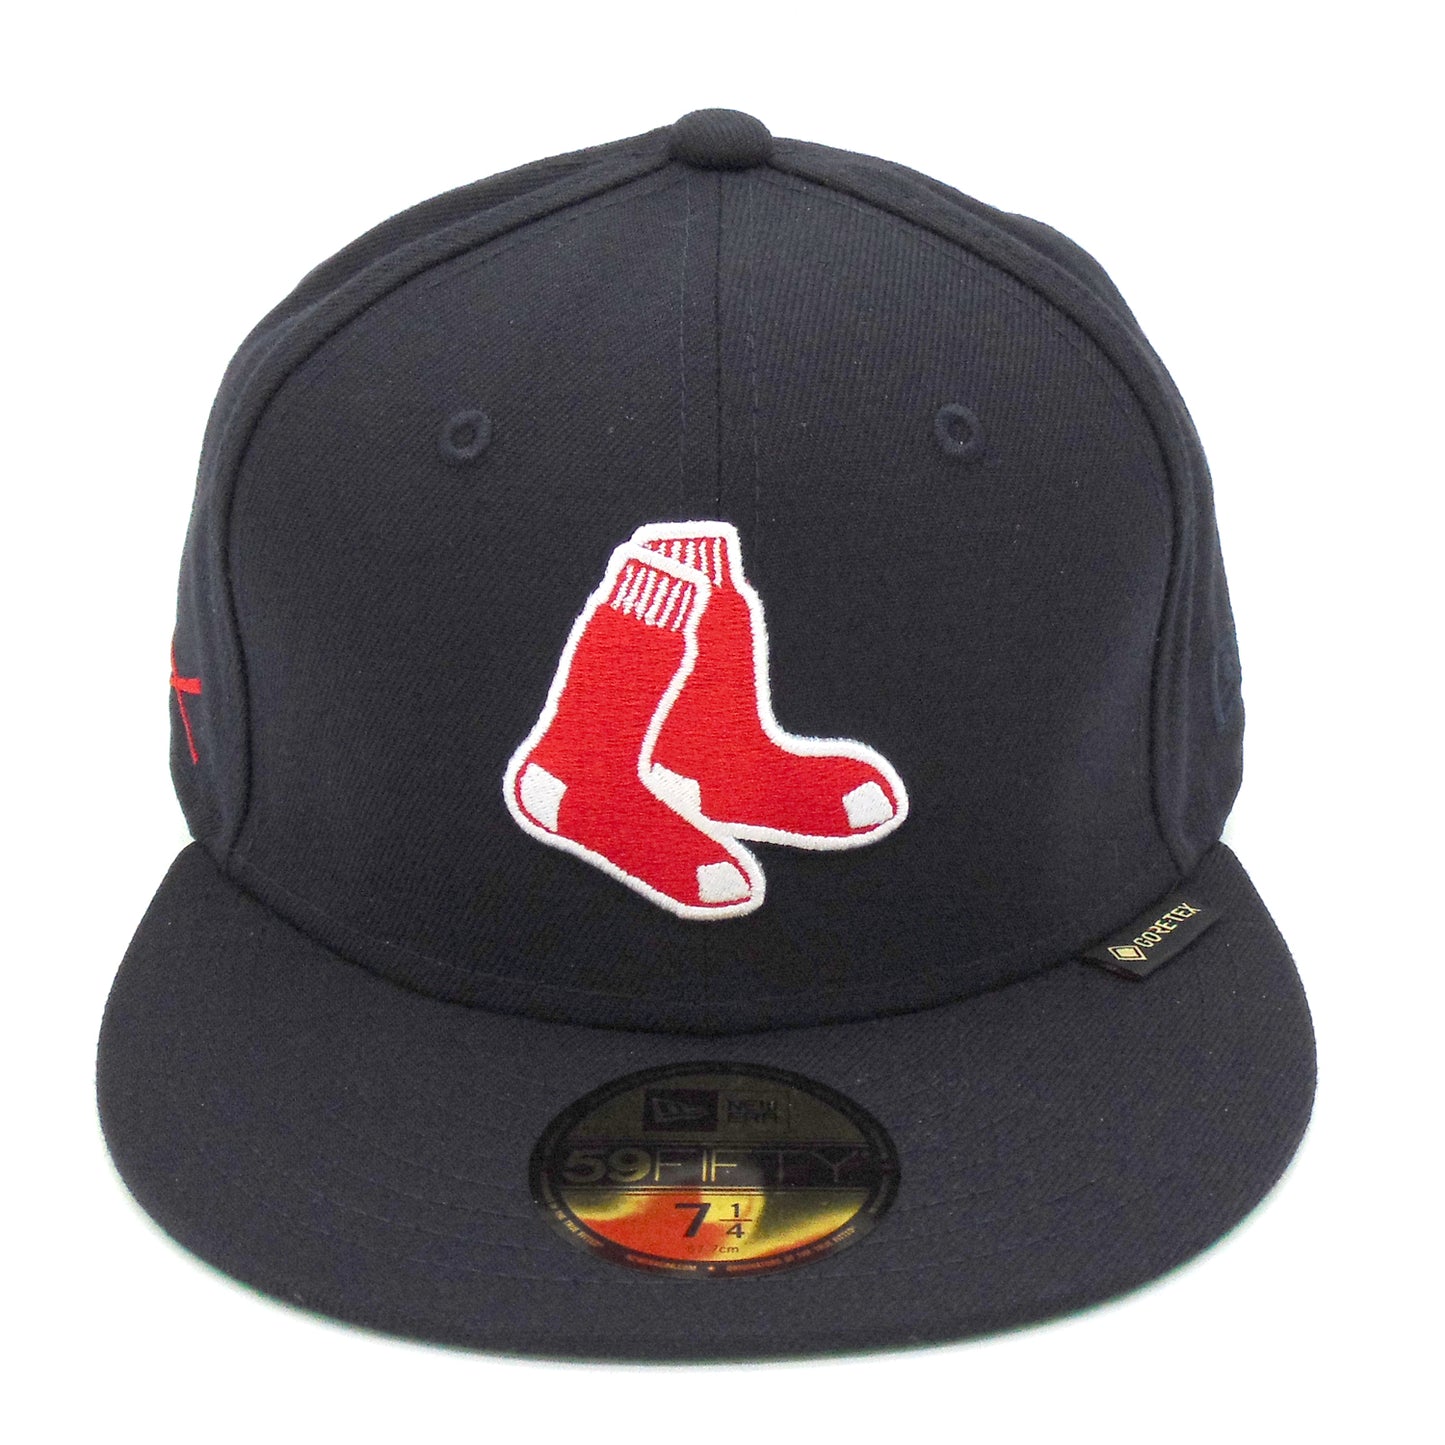 Boston Red Sox JustFitteds Exclusive Gore-tex New Era Cap Navy